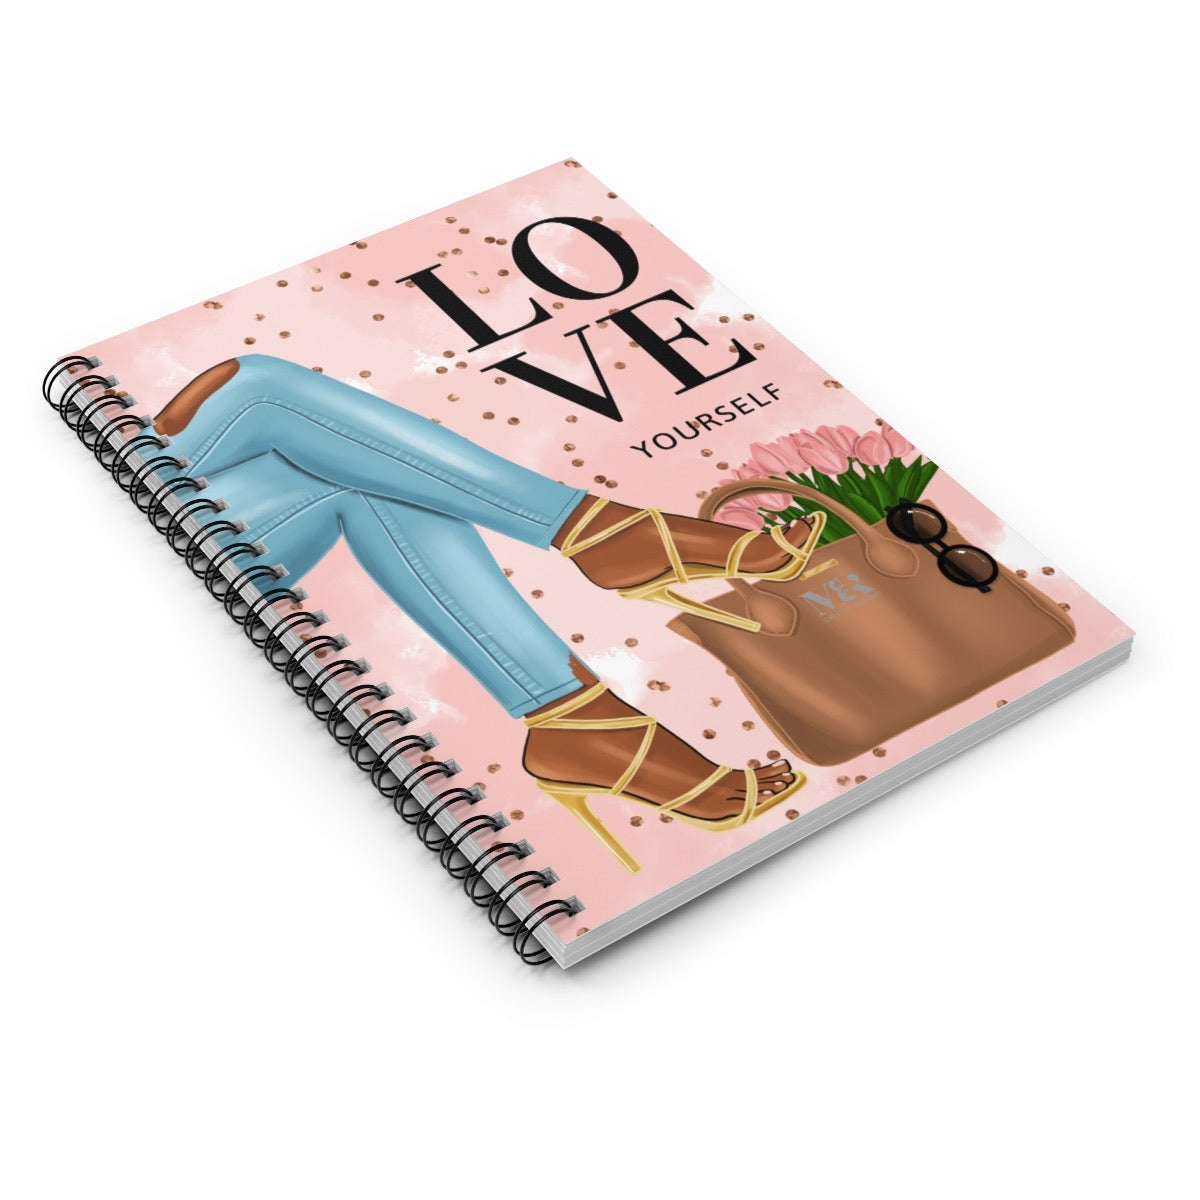 Black Woman With Love Yourself Journal